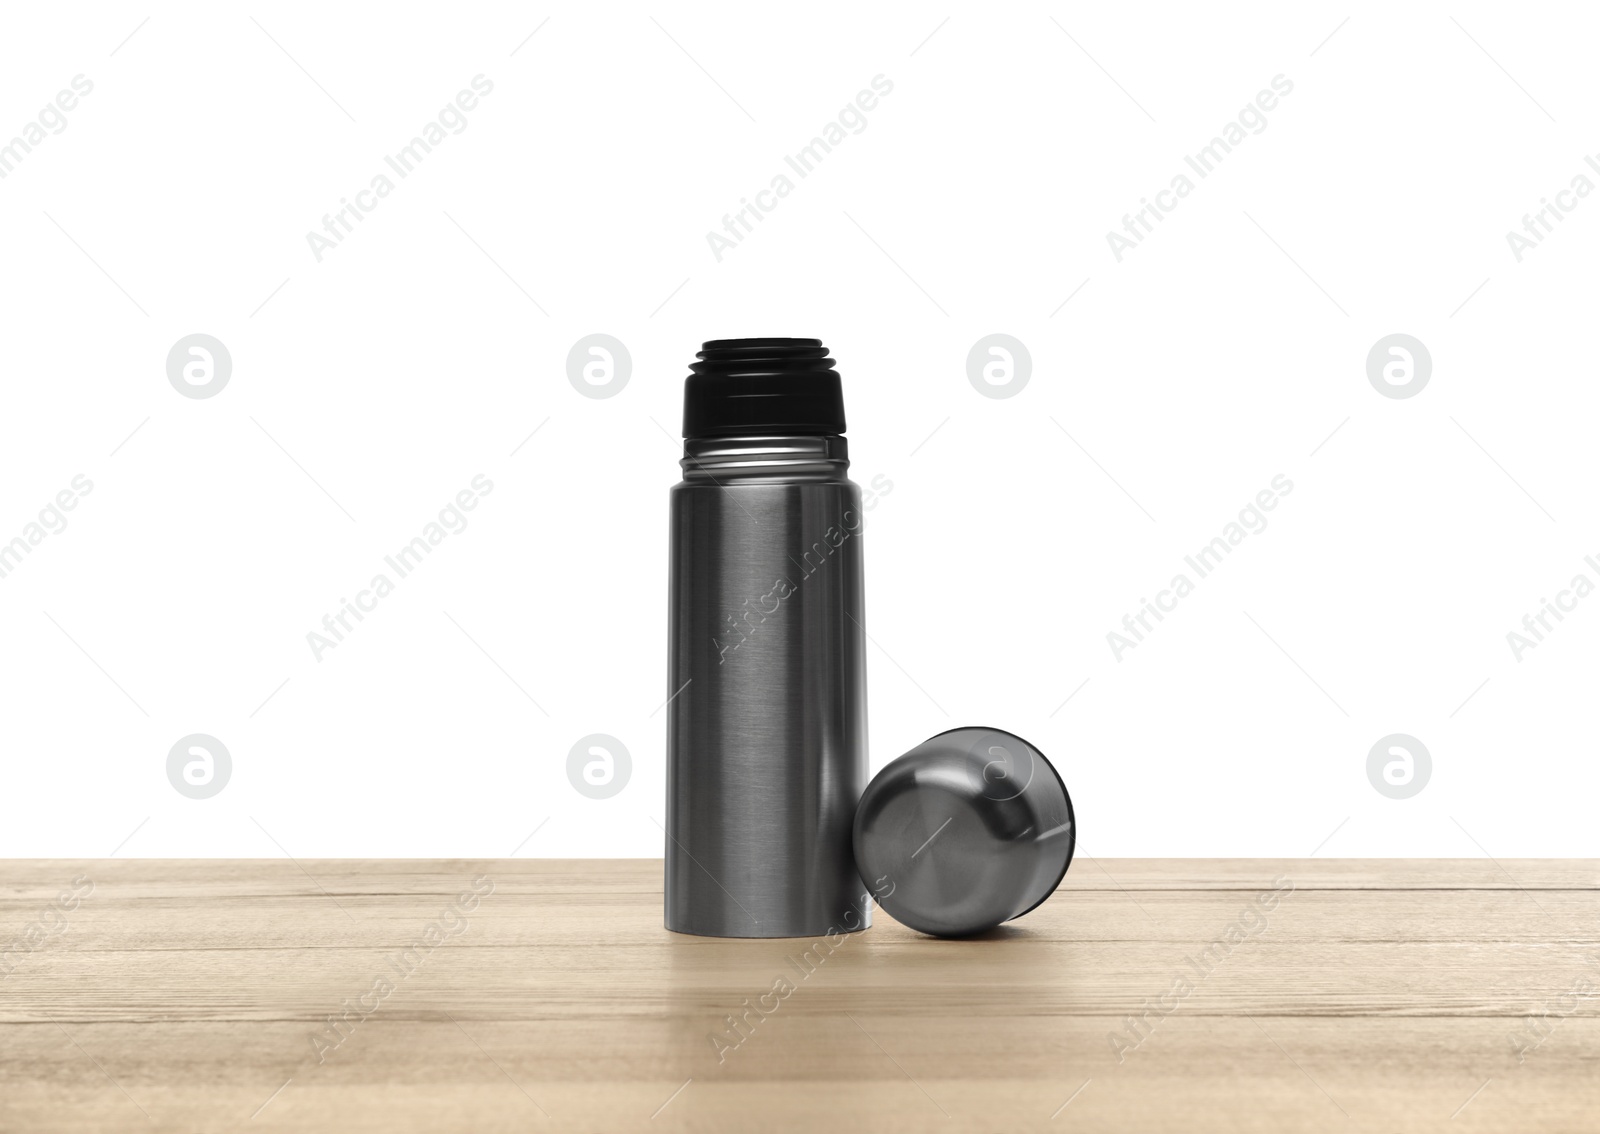 Photo of Stylish thermo bottle on wooden table against white background